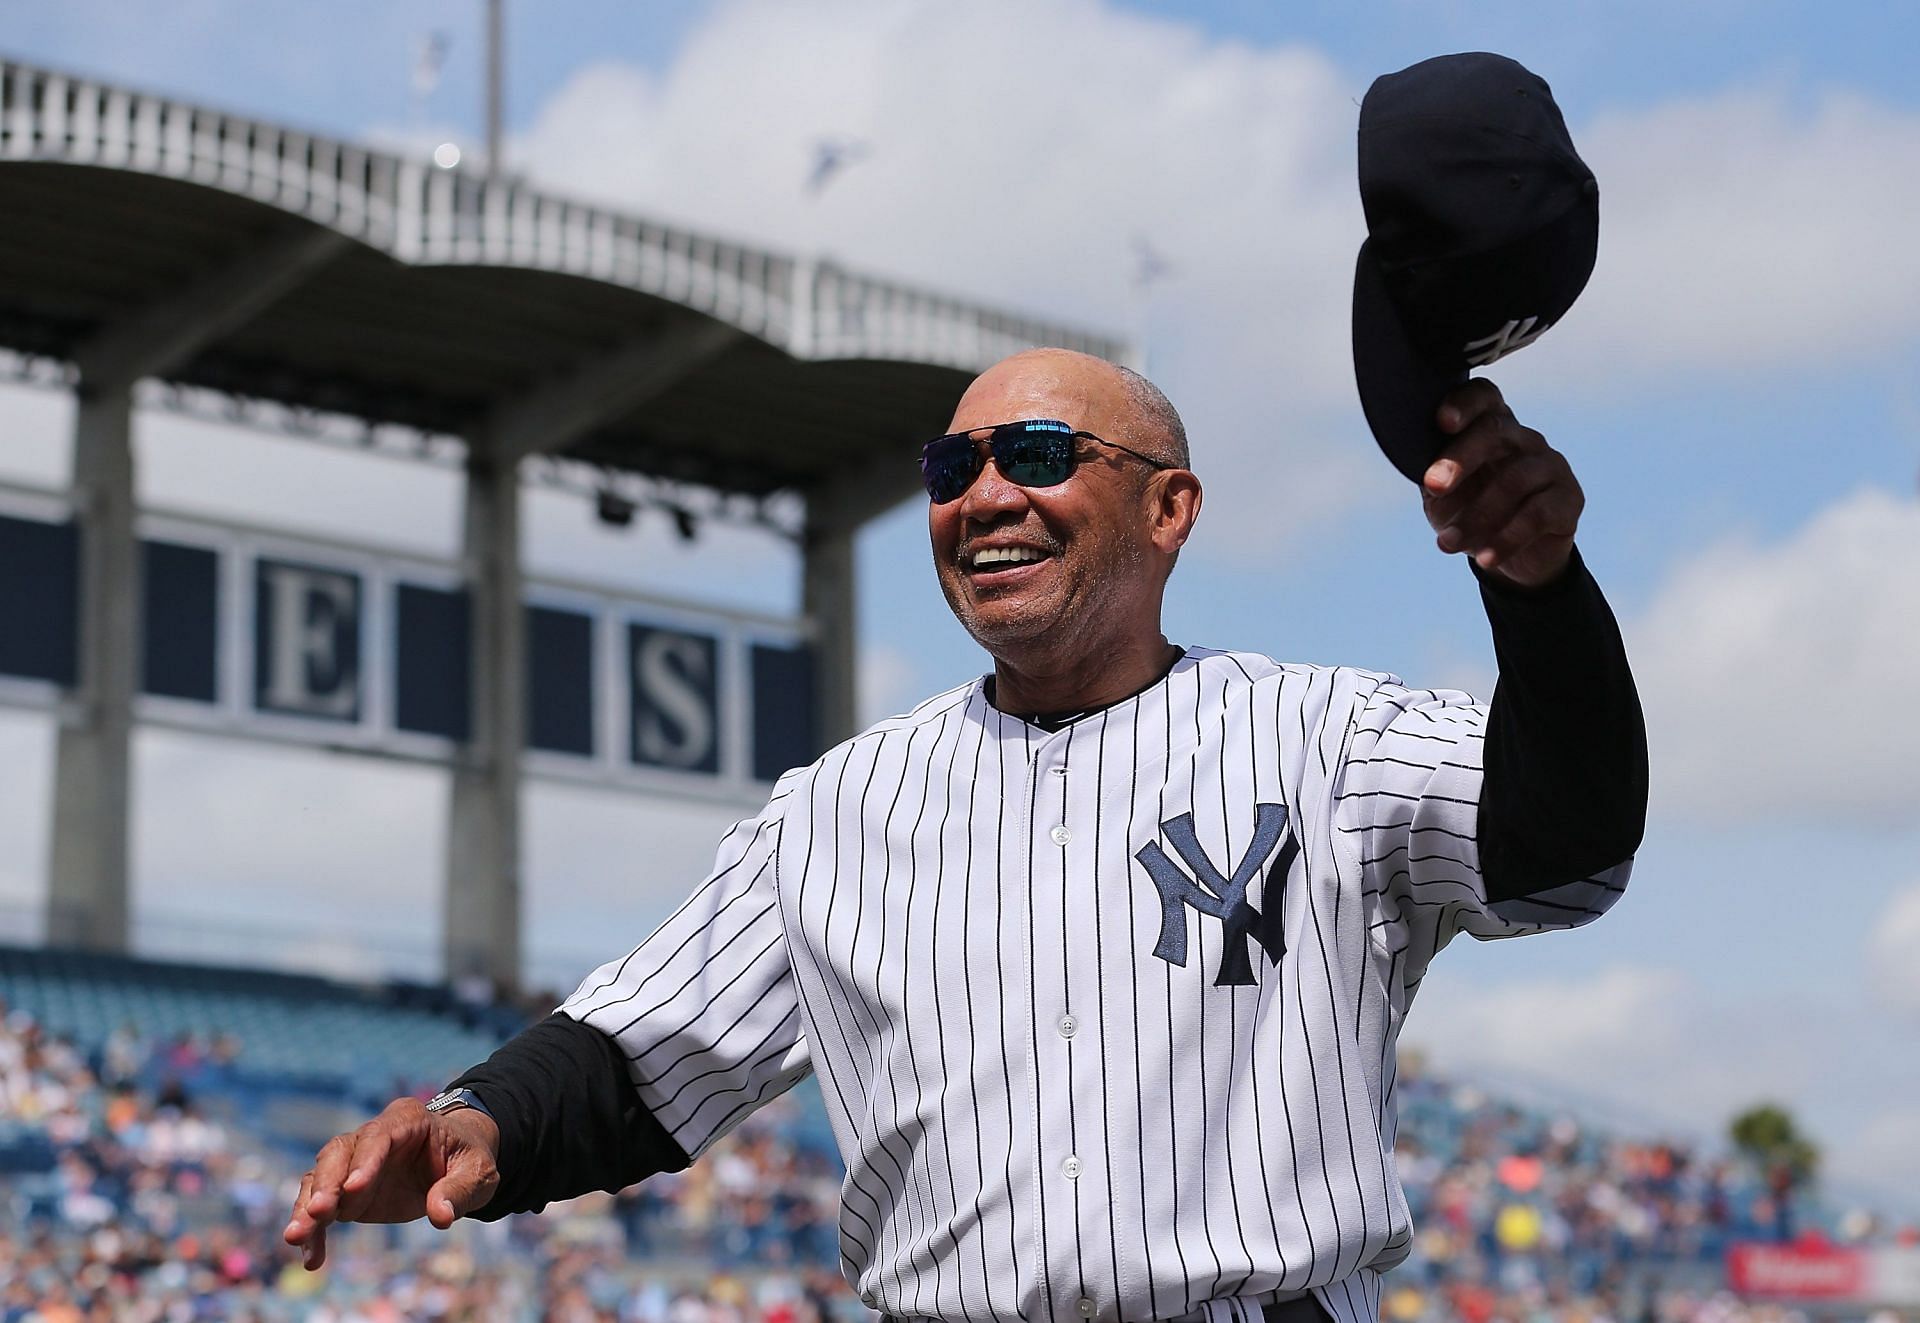 Detroit Tigers v New York Yankees: TAMPA FL- MARCH 2: Former New York Yankees HOF Reggie Jackson waves to the crowd prior to the start of the Spring Training Game against the Detroit Tigers on March 2, 2016, during the Spring Training Game at George Steinbrenner Field in Tampa, Florida. (Photo by Leon Halip/Getty Images)